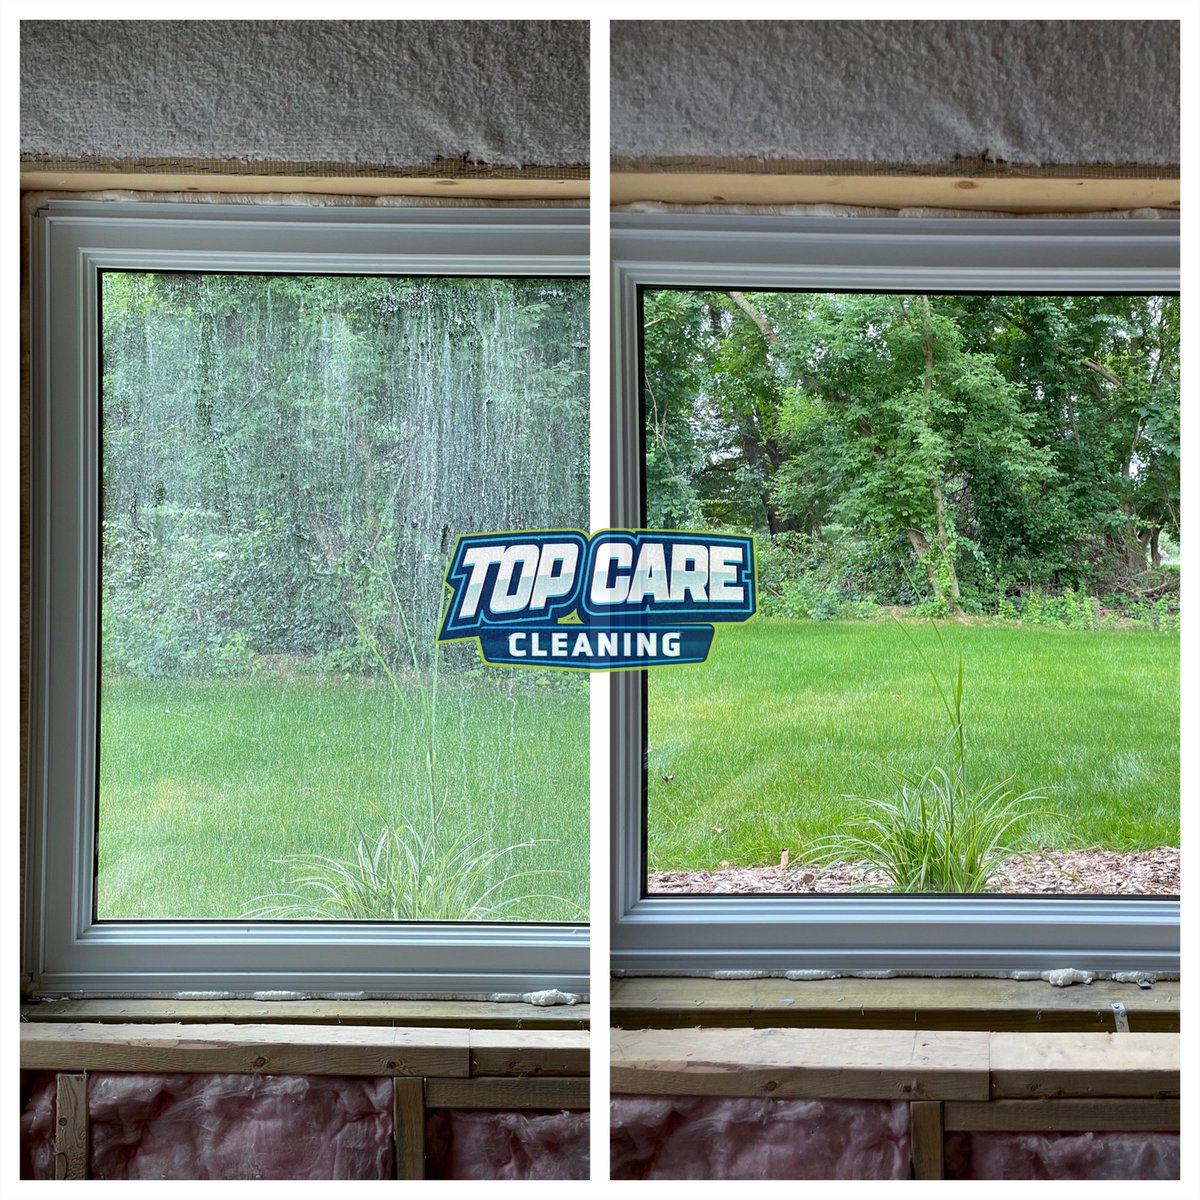 Rain and condensation can make it hard to enjoy your windows. Let us help get that all cleared away so you can enjoy the springtime views! Call (616) 530-9129 for a free estimate!